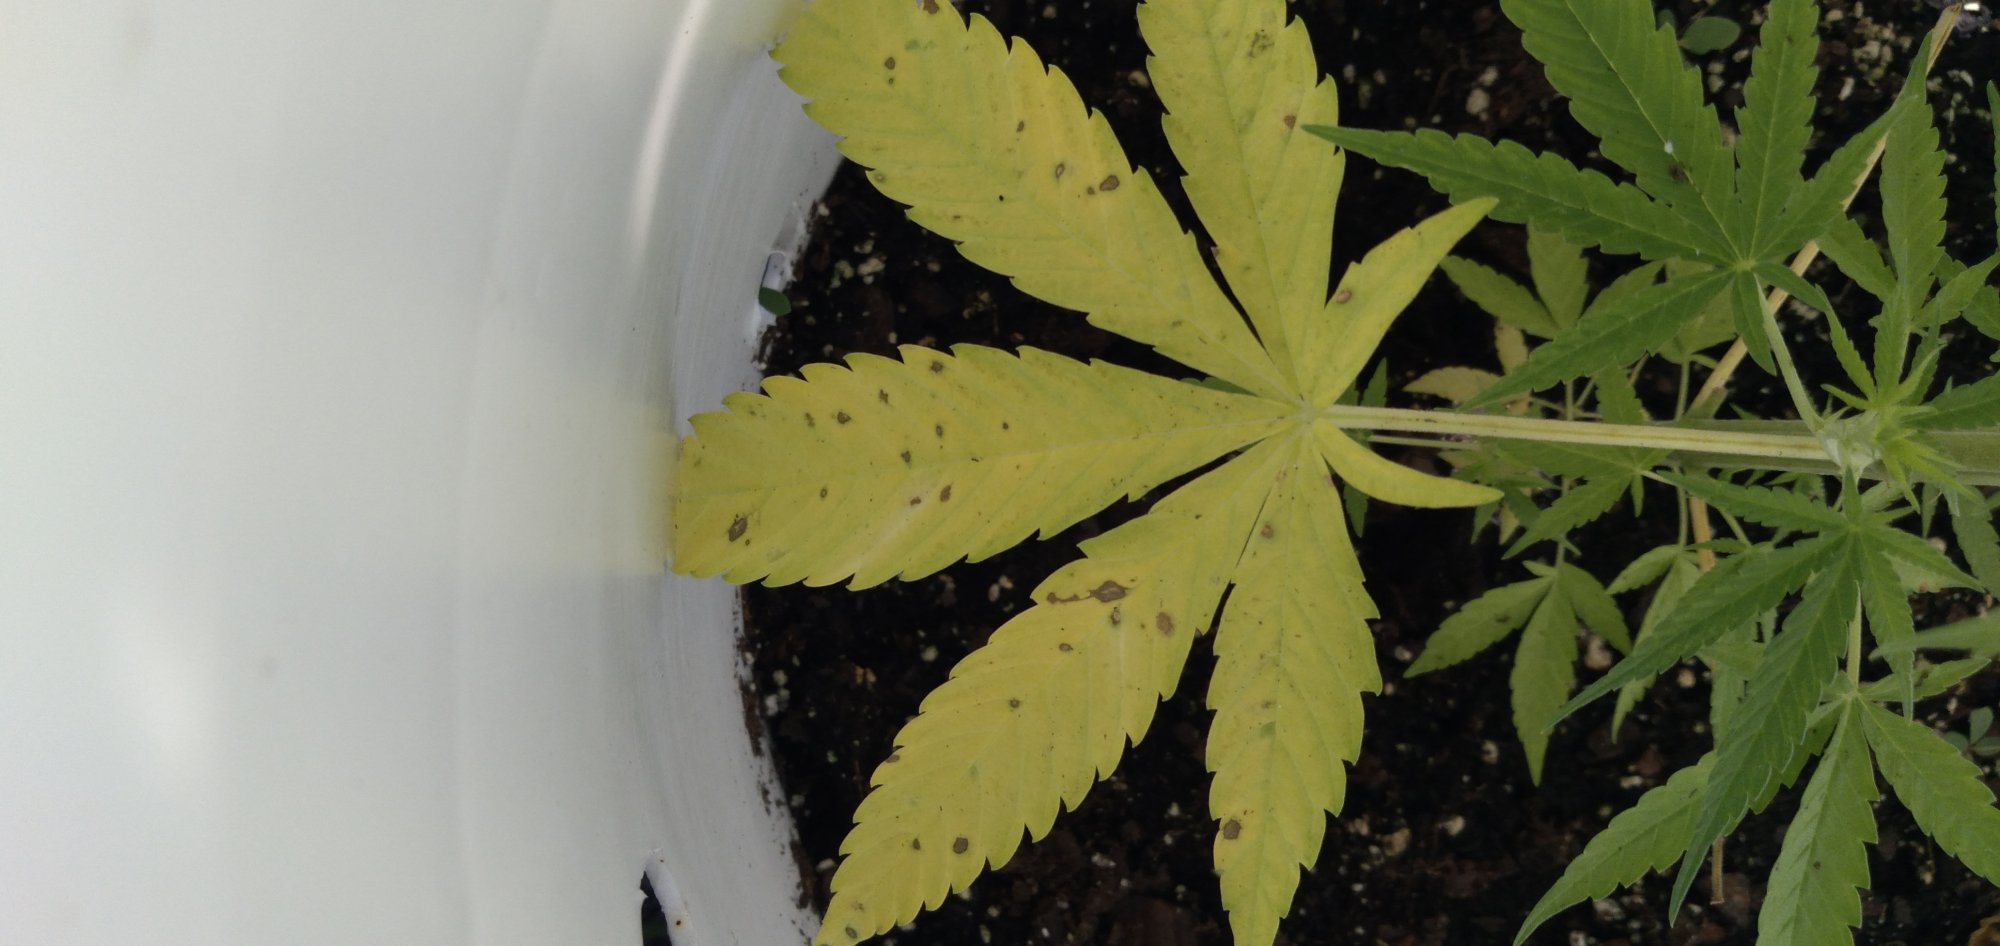 Bottom sun leafs are yellowing and have brown spots 4